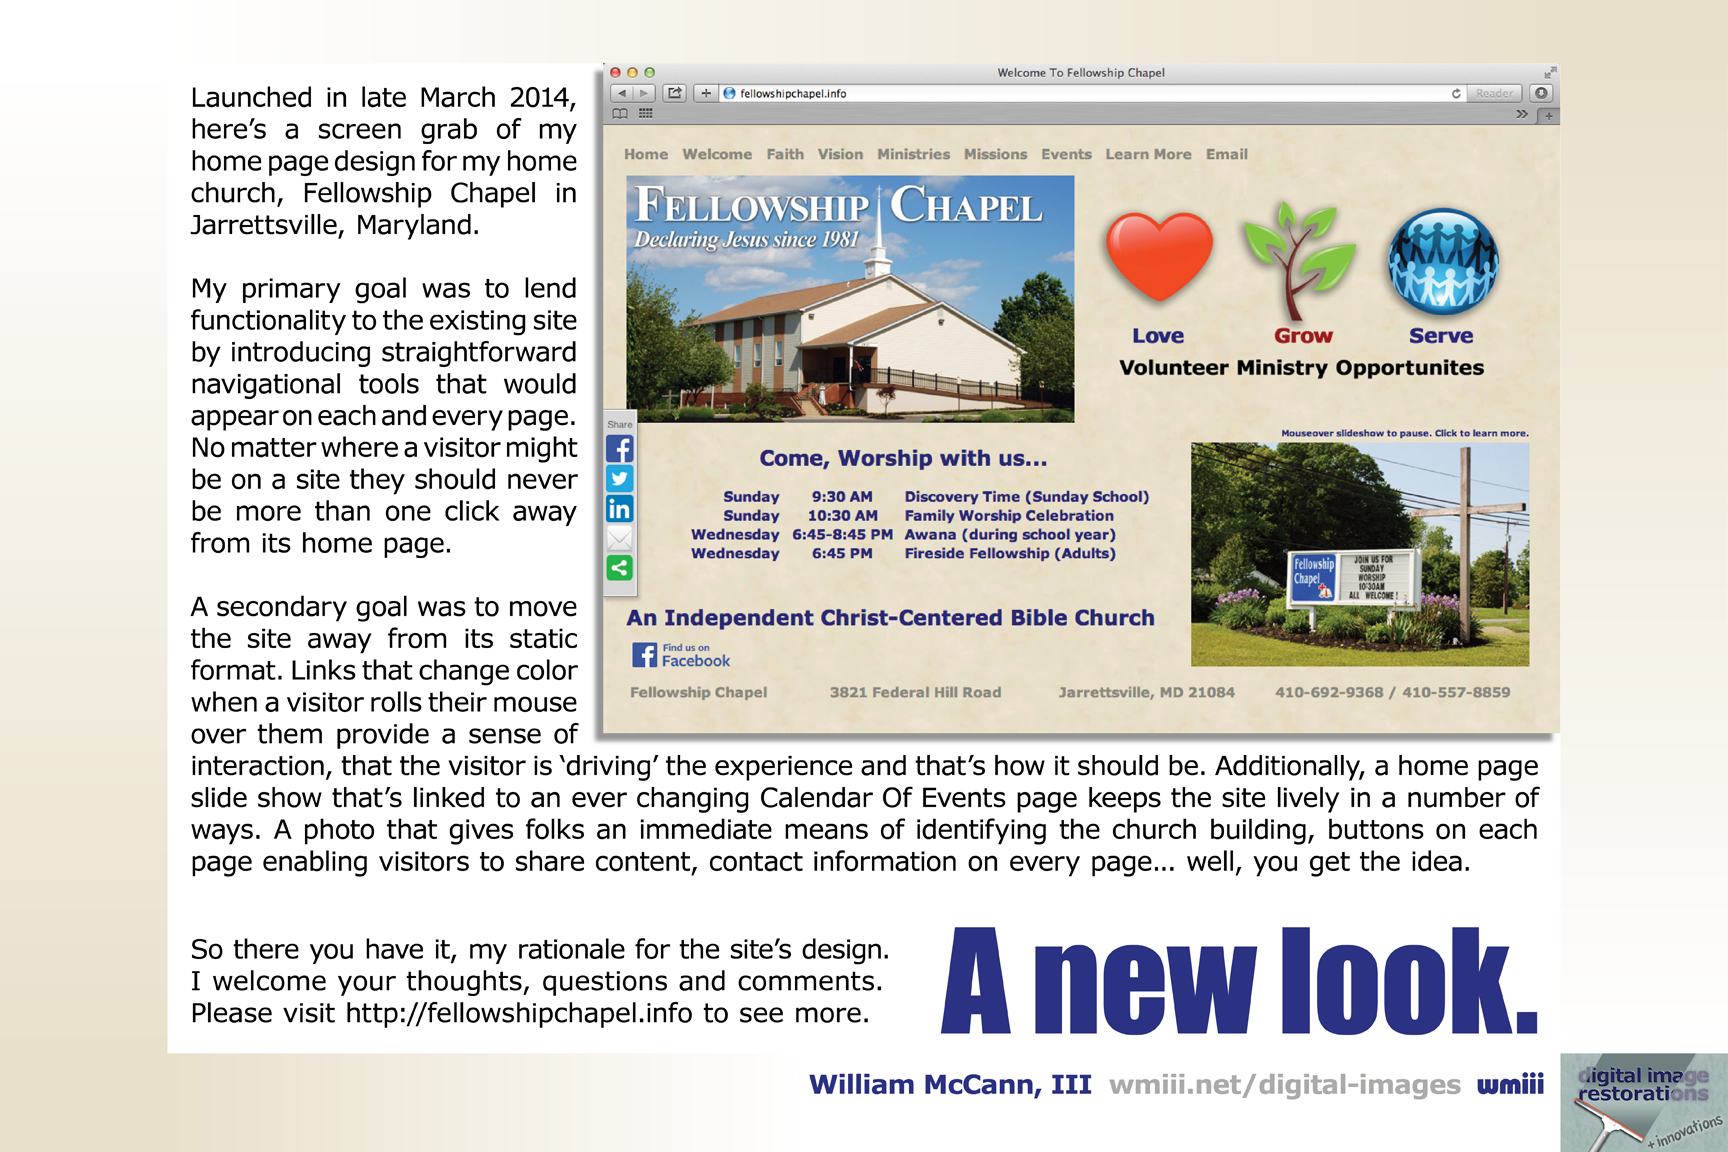 A new look for Fellowship Chapel's website.